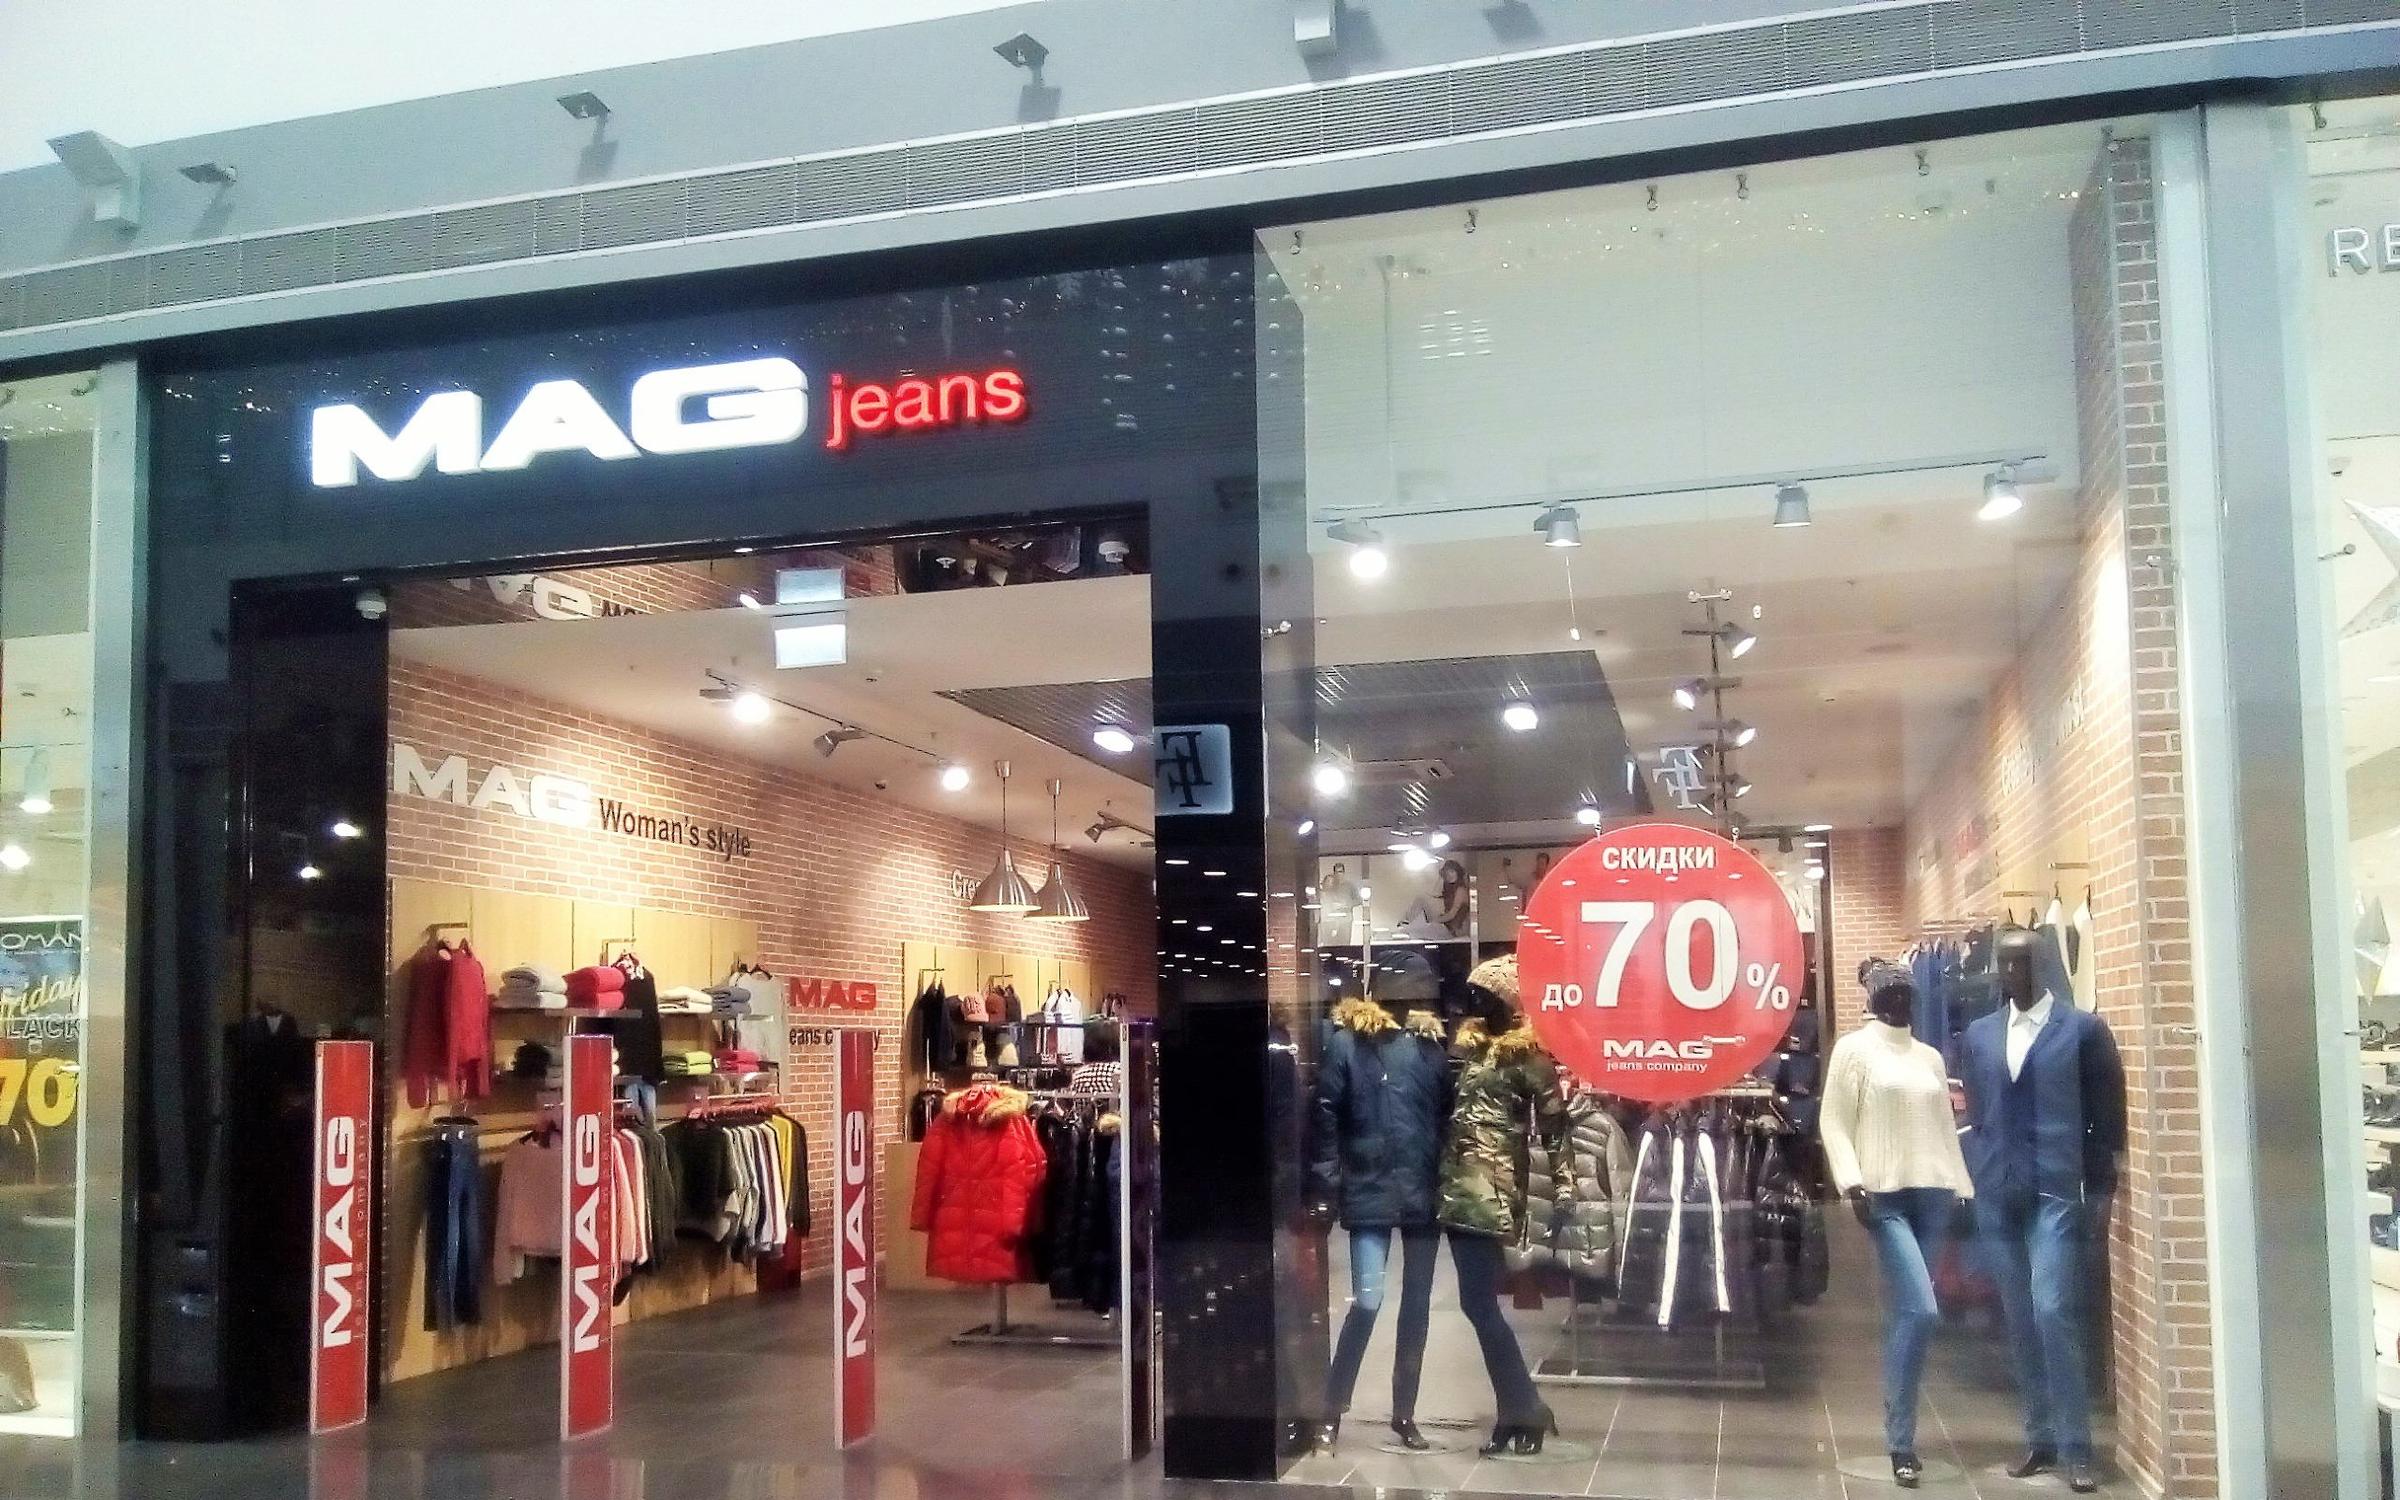 Mag jeans